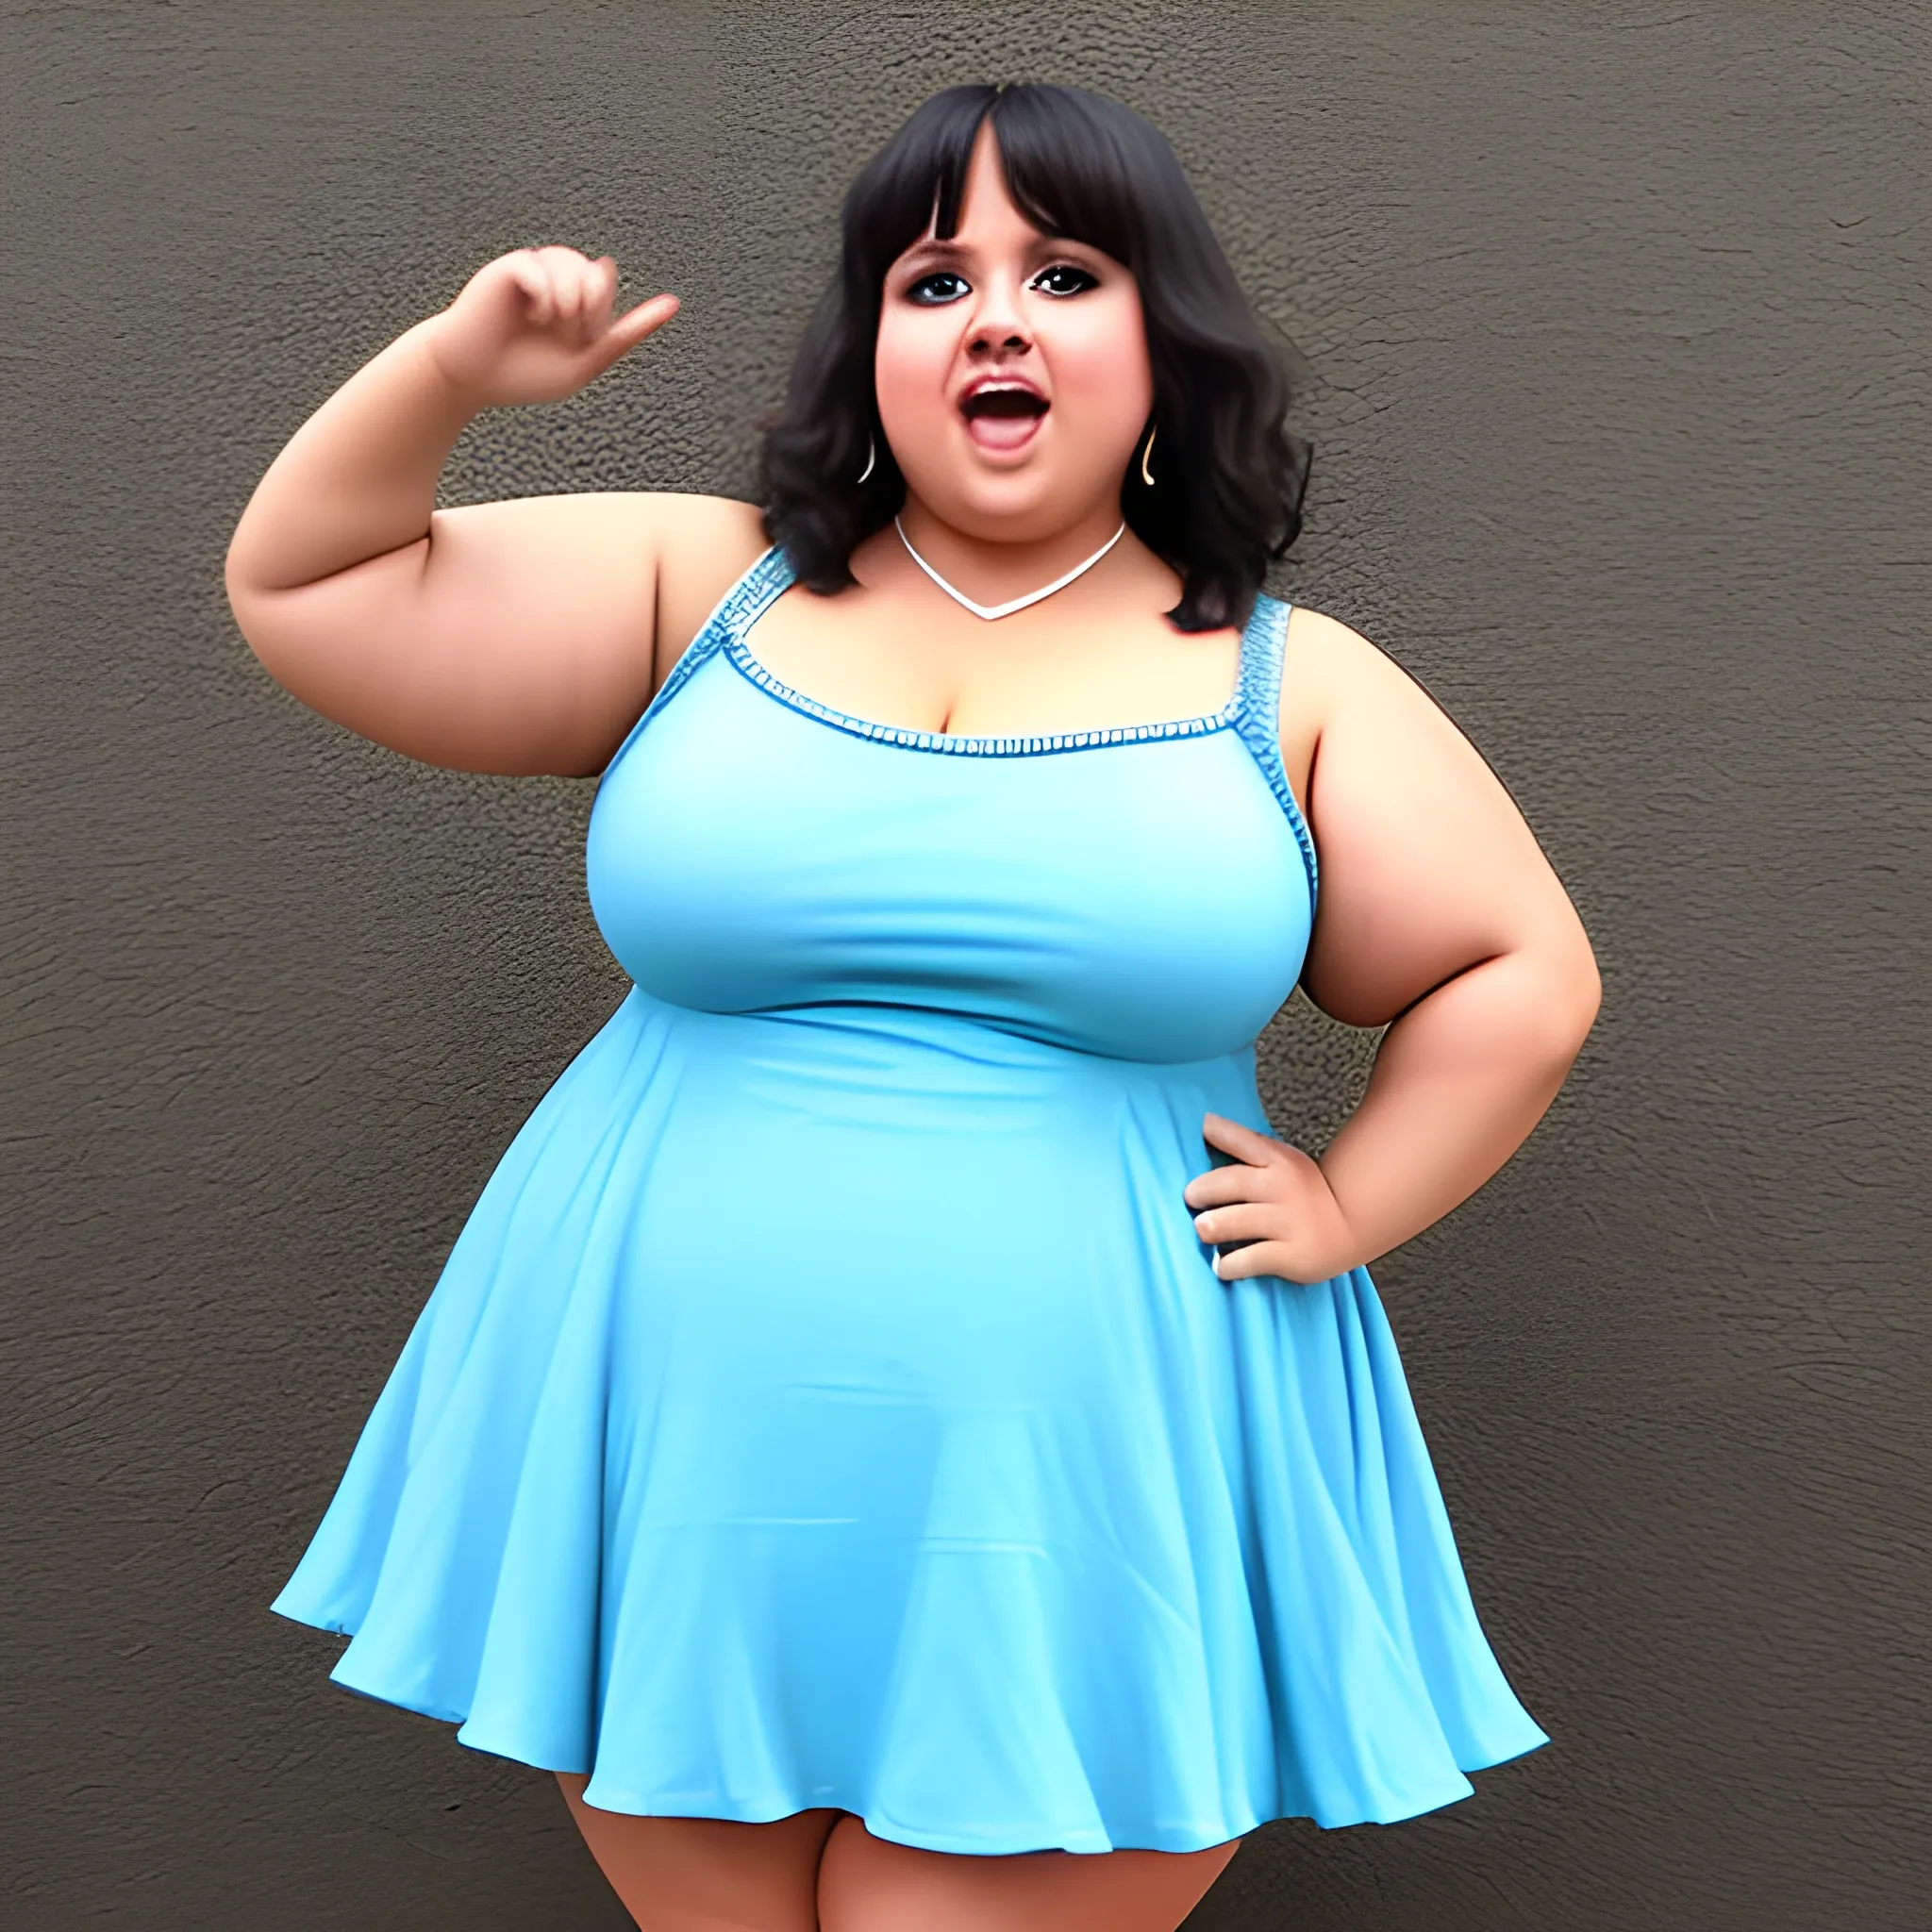 A chubby latina is dancing, she is wearing a very short dress 